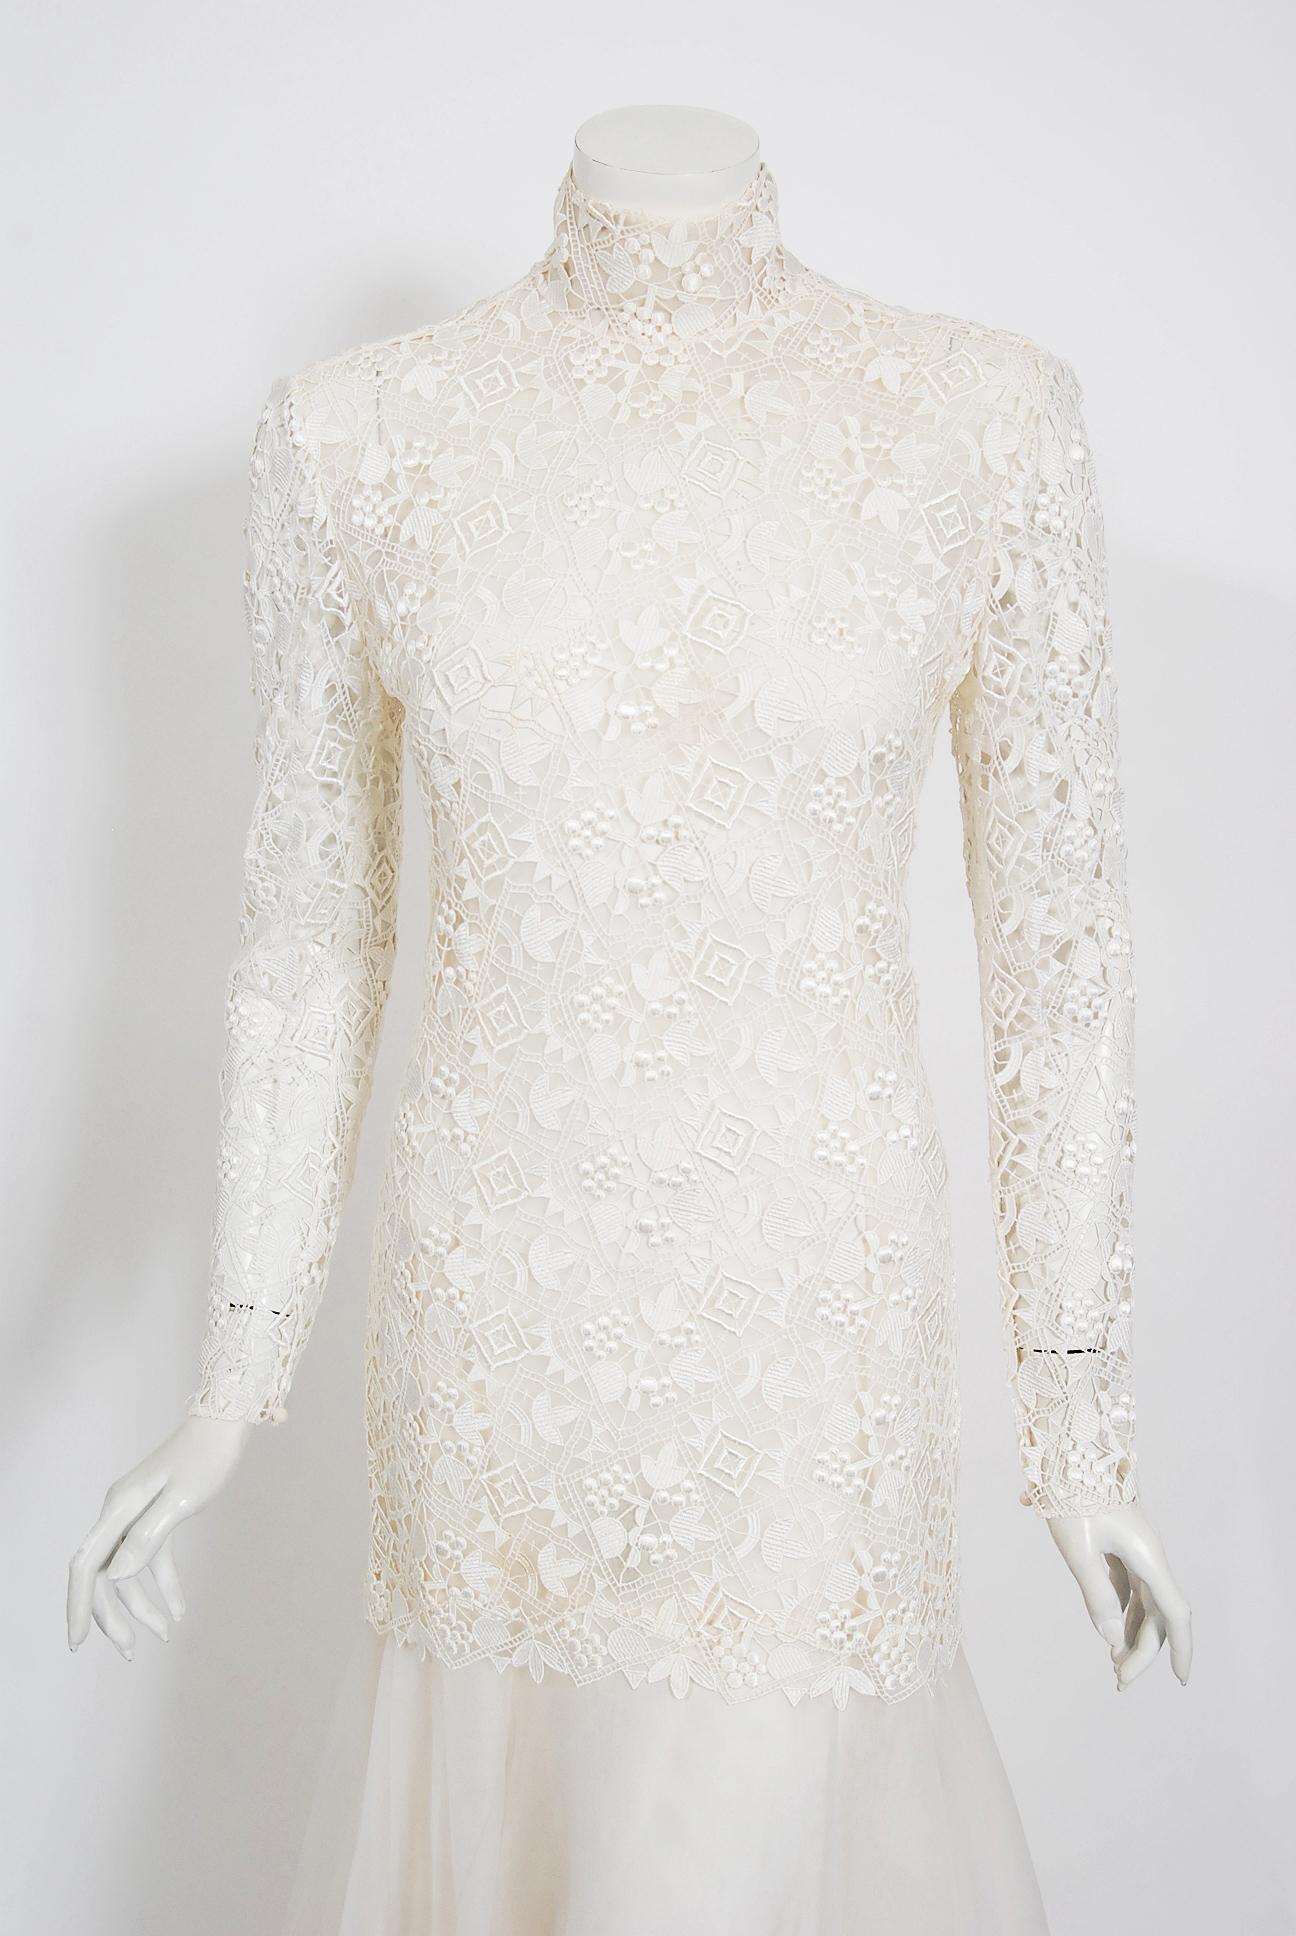 An ethereal early 1990's Bernard Perris Paris Couture ivory lace and silk gown that retailed for over $5,000. At age 16, Perris ventured to Paris, where he eventually was hired as a couture assistant for Guy Laroche. He then went on to design